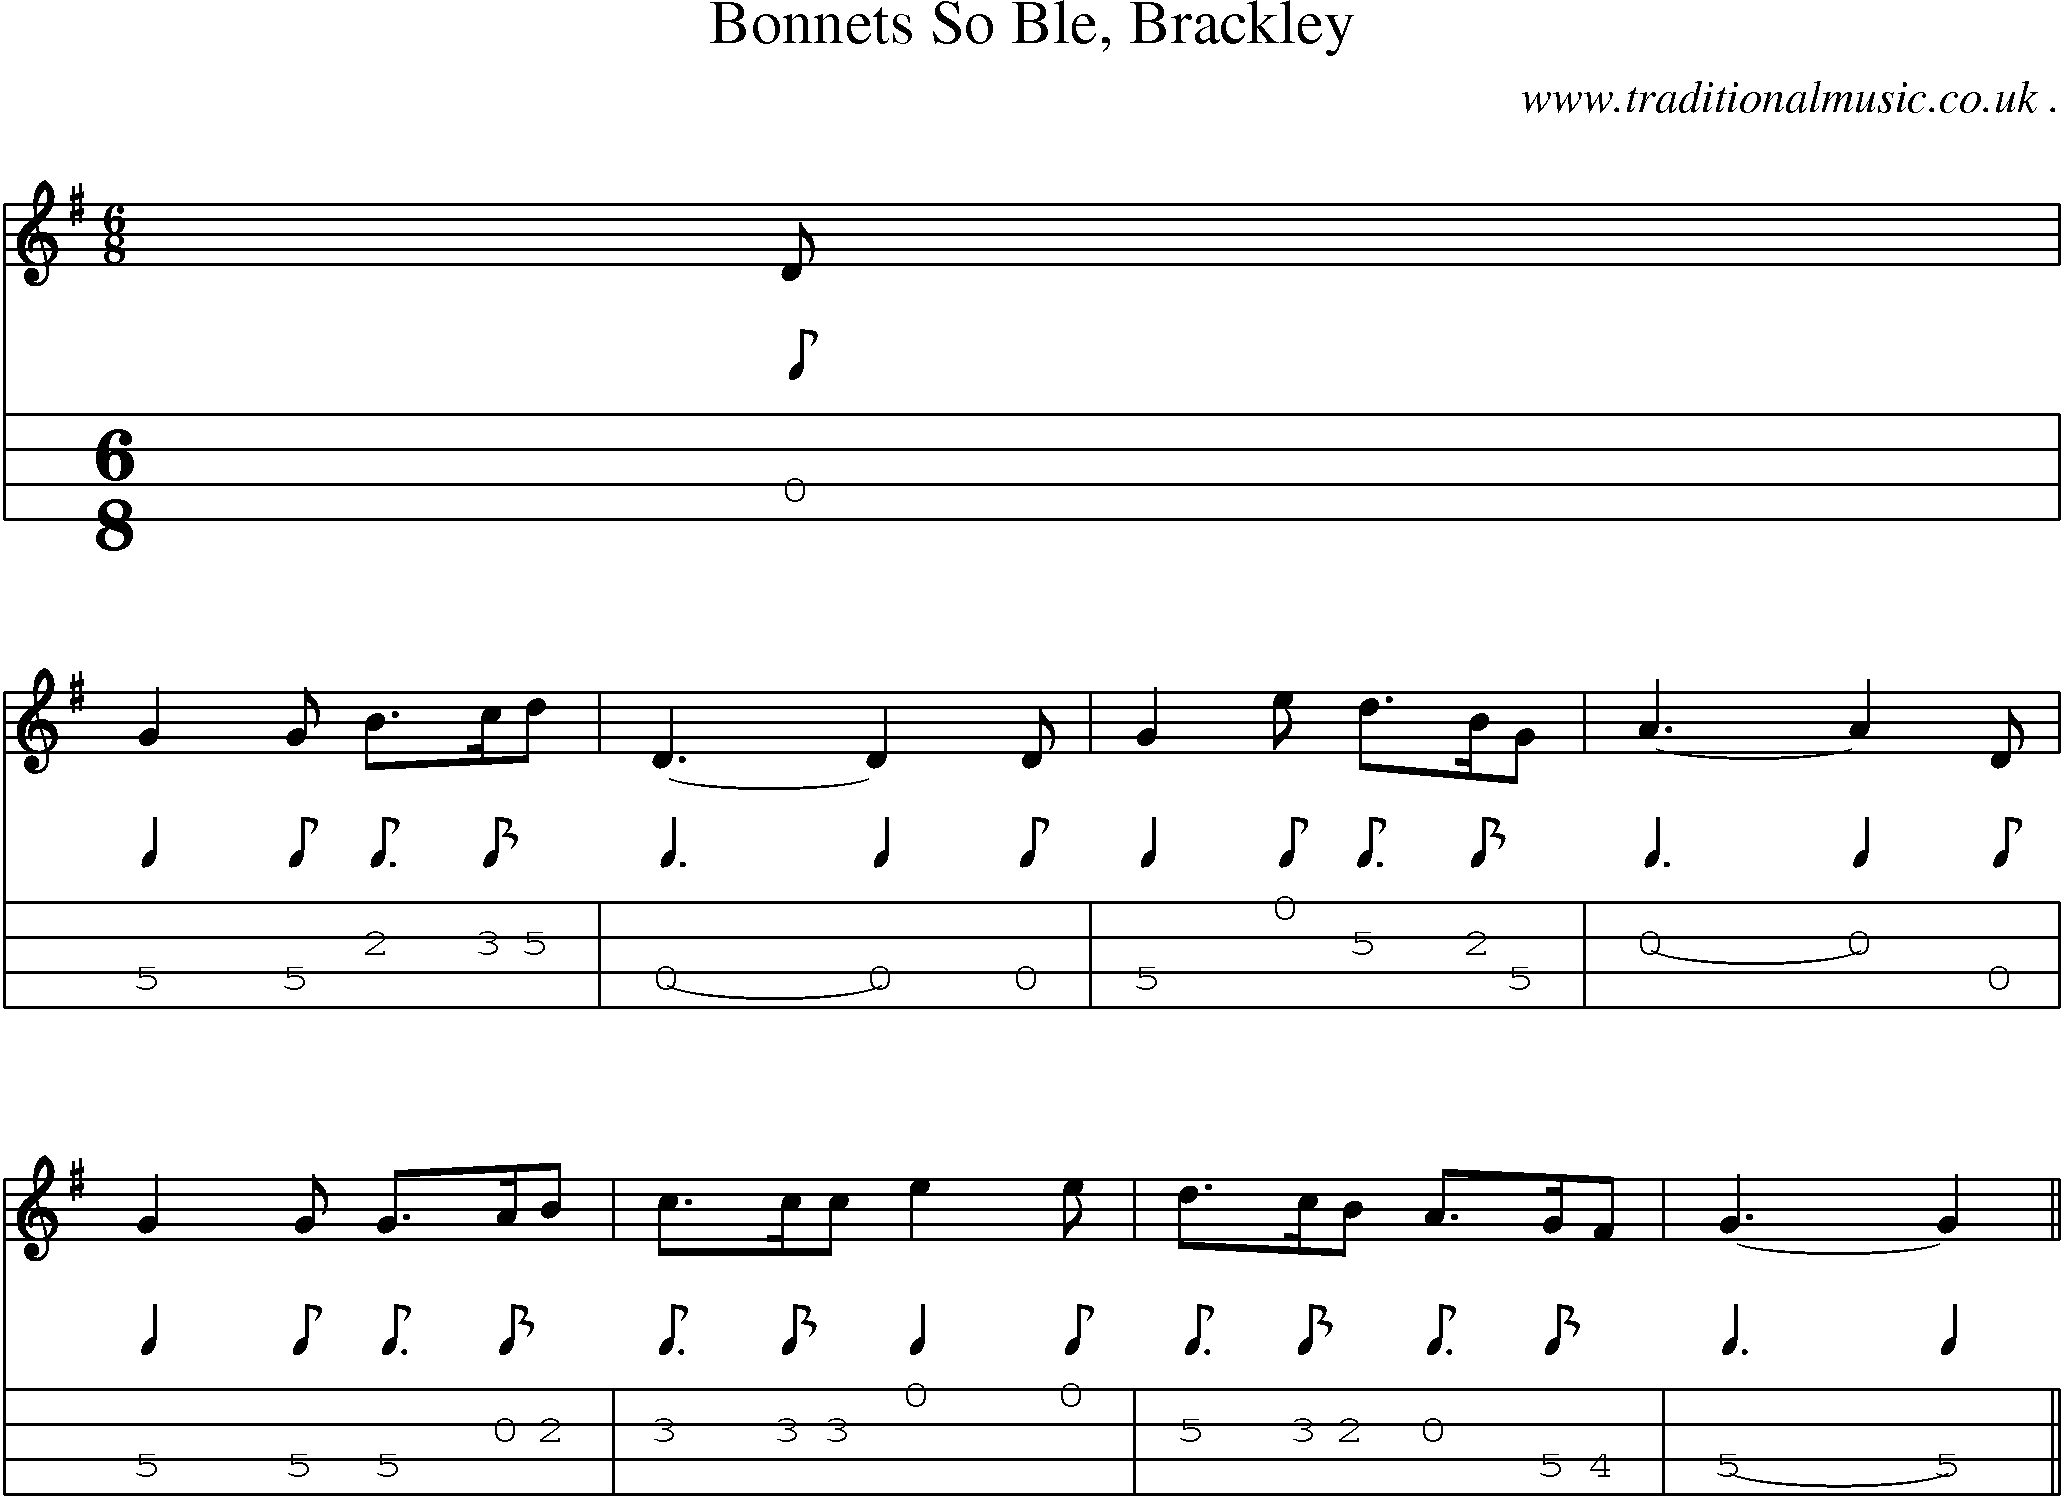 Sheet-Music and Mandolin Tabs for Bonnets So Ble Brackley